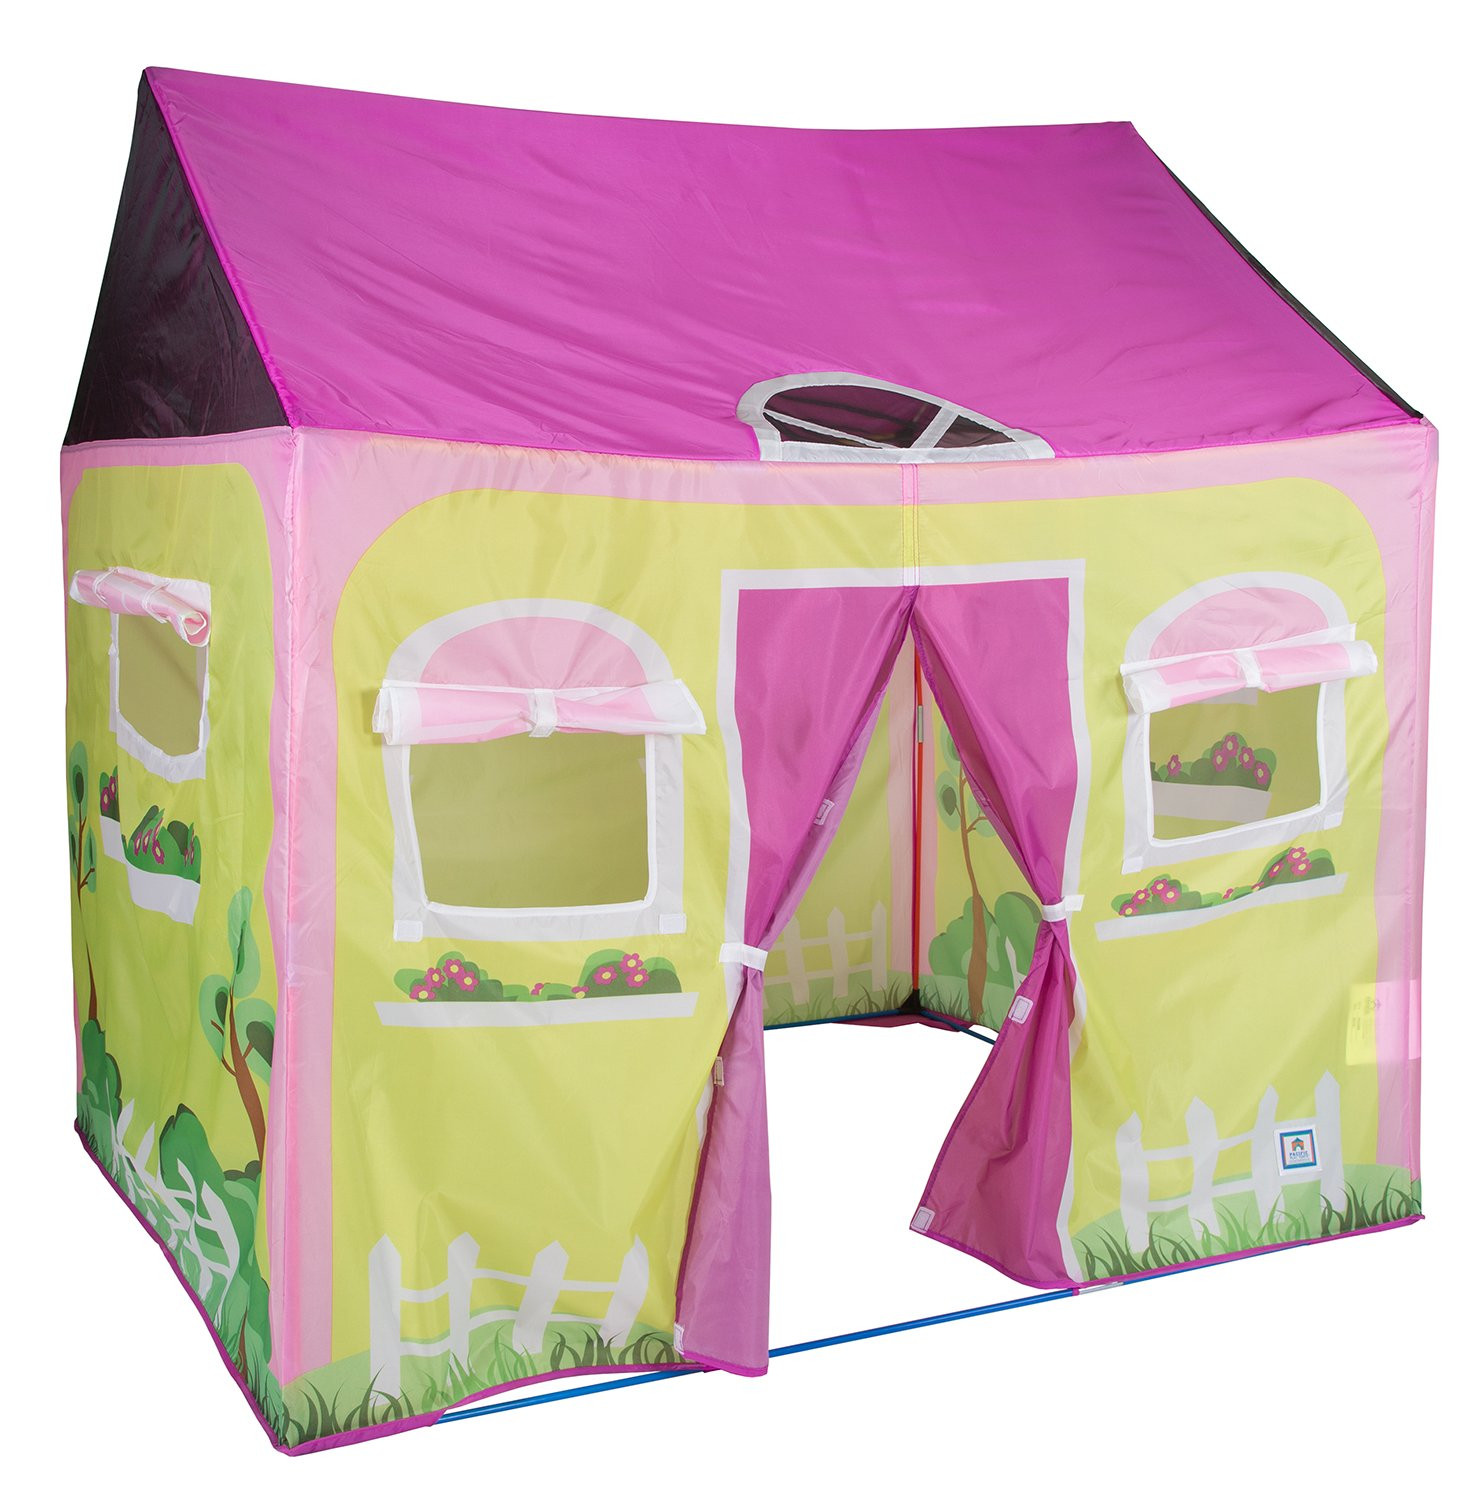 Kids Indoor Play Tent
 Kids Girls Play Tent Cottage Play House Playhouse Indoor